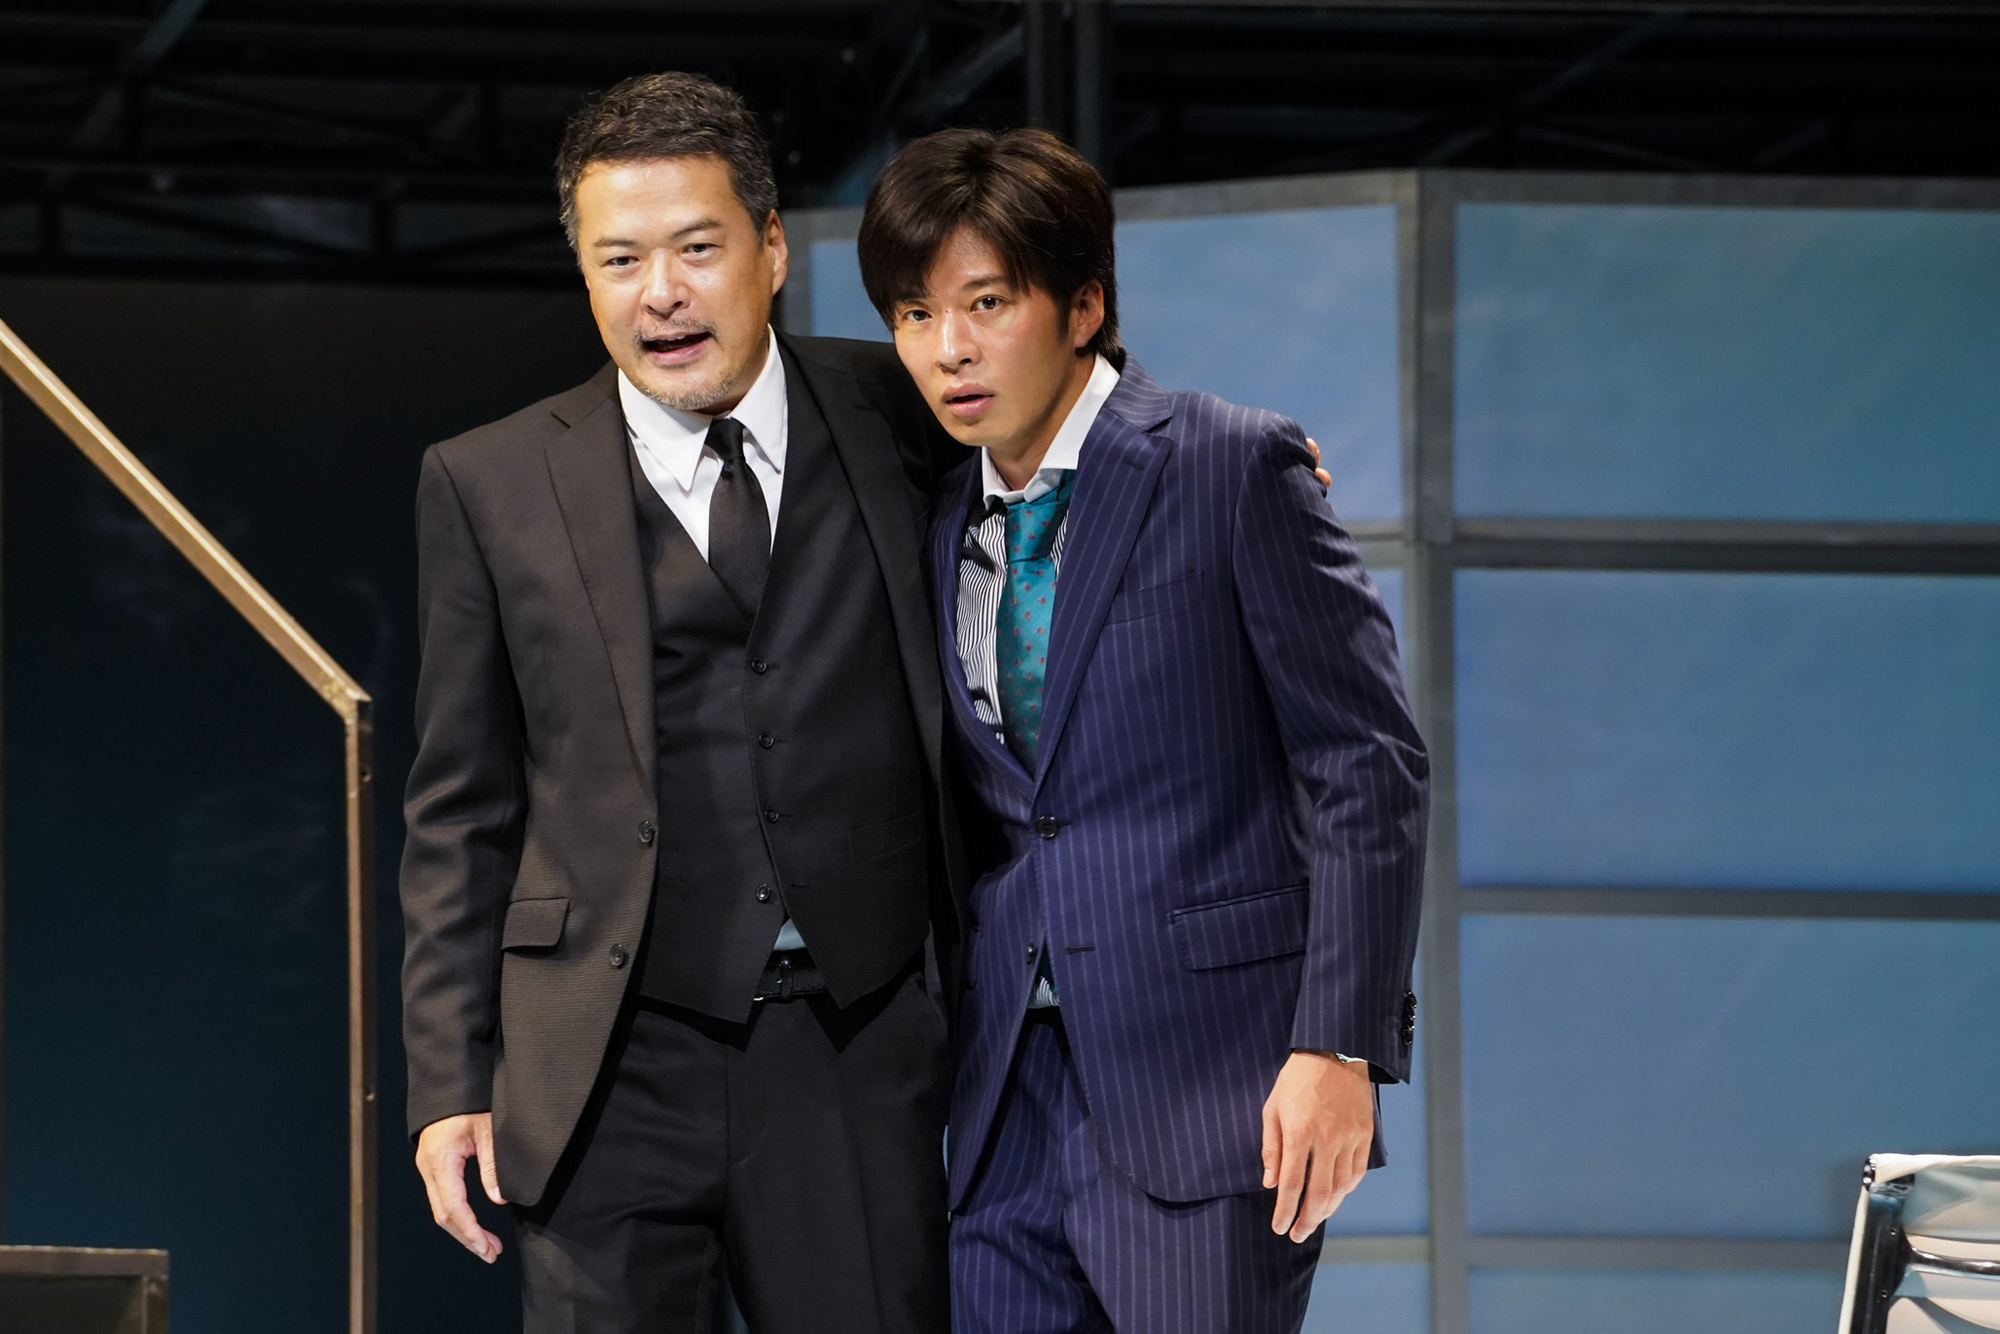 In with the boss: Tetsushi Tanaka (left) and Kei Tanaka play Buddy and Guy in a Japanese stage production of 'Swimming With Sharks.' Their characters were originally performed by Kevin Spacey and Frank Whaley in the 1994 film the production is based on. | &#169; NOBUHIKO HIKIJI